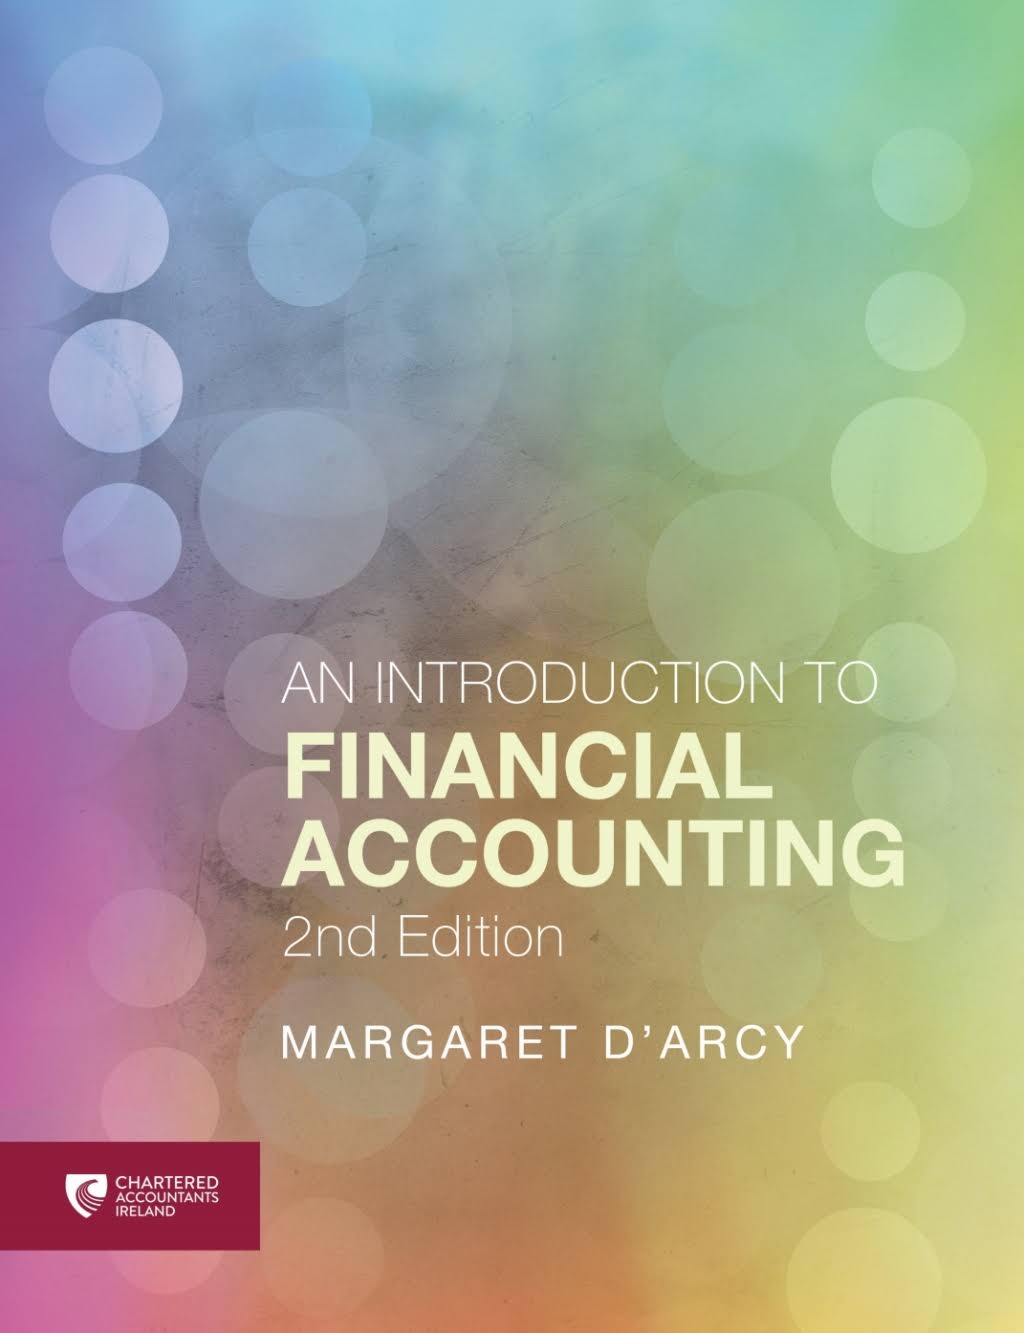 An Introduction to Financial Accounting: 2nd Edition - Margaret D'Arcy